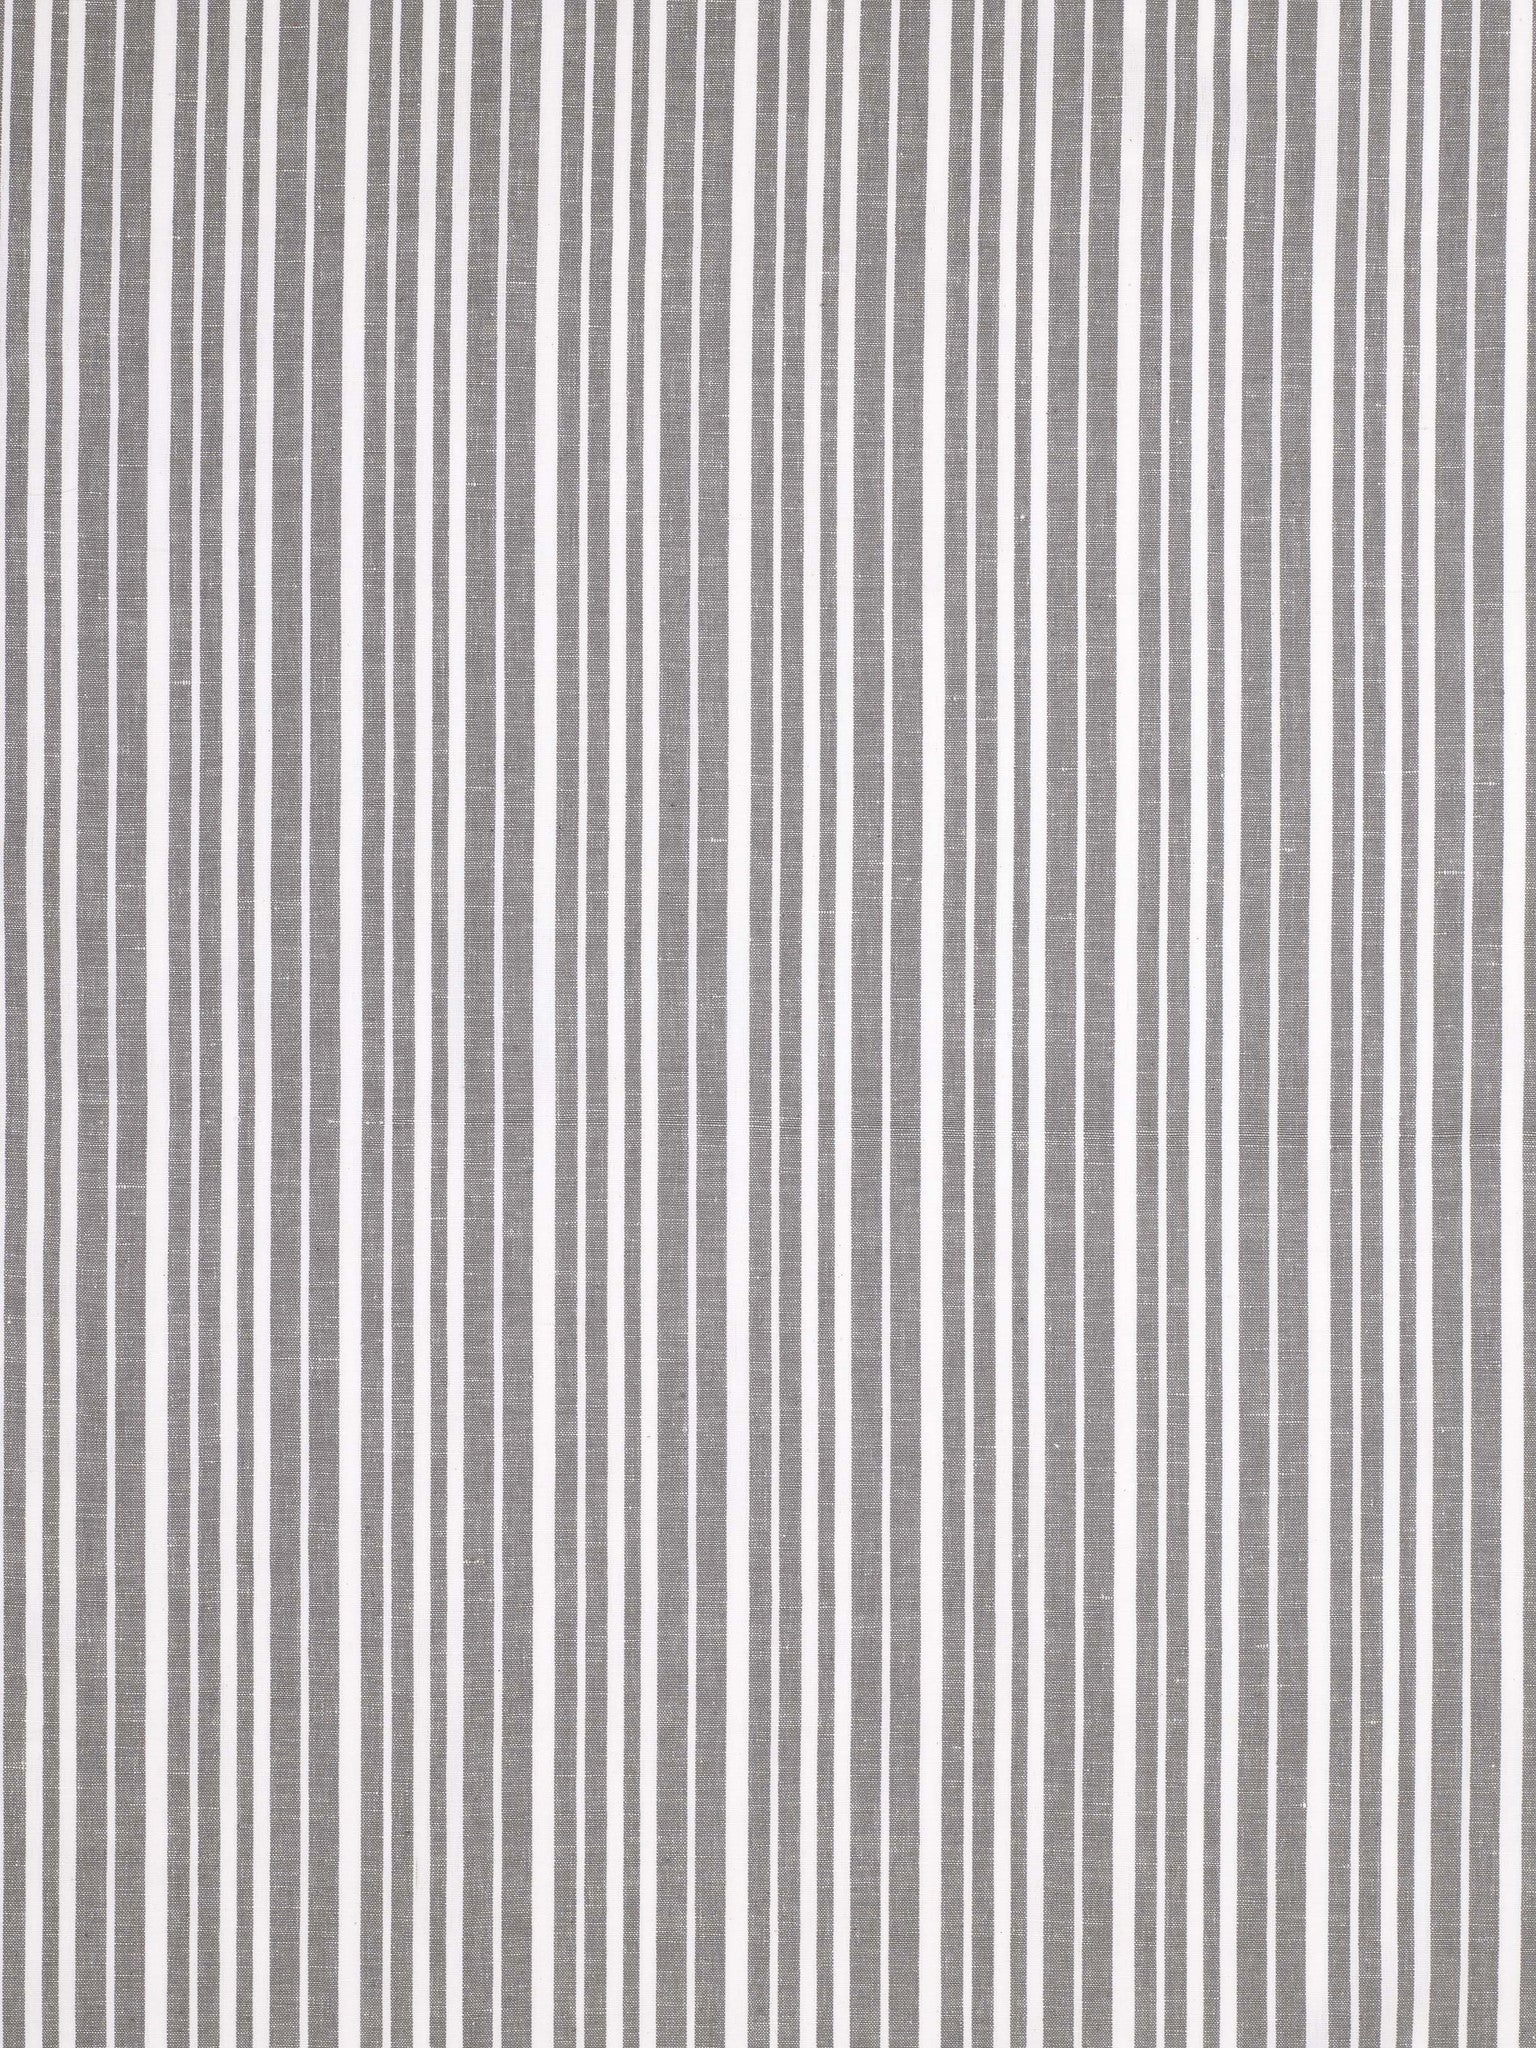 Palermo Ticking Stripe Cotton Linen Home Decor Fabric by the Meter or by the yard for curtains, blinds or upholstery in Stone Grey - ships from Canada (USA)